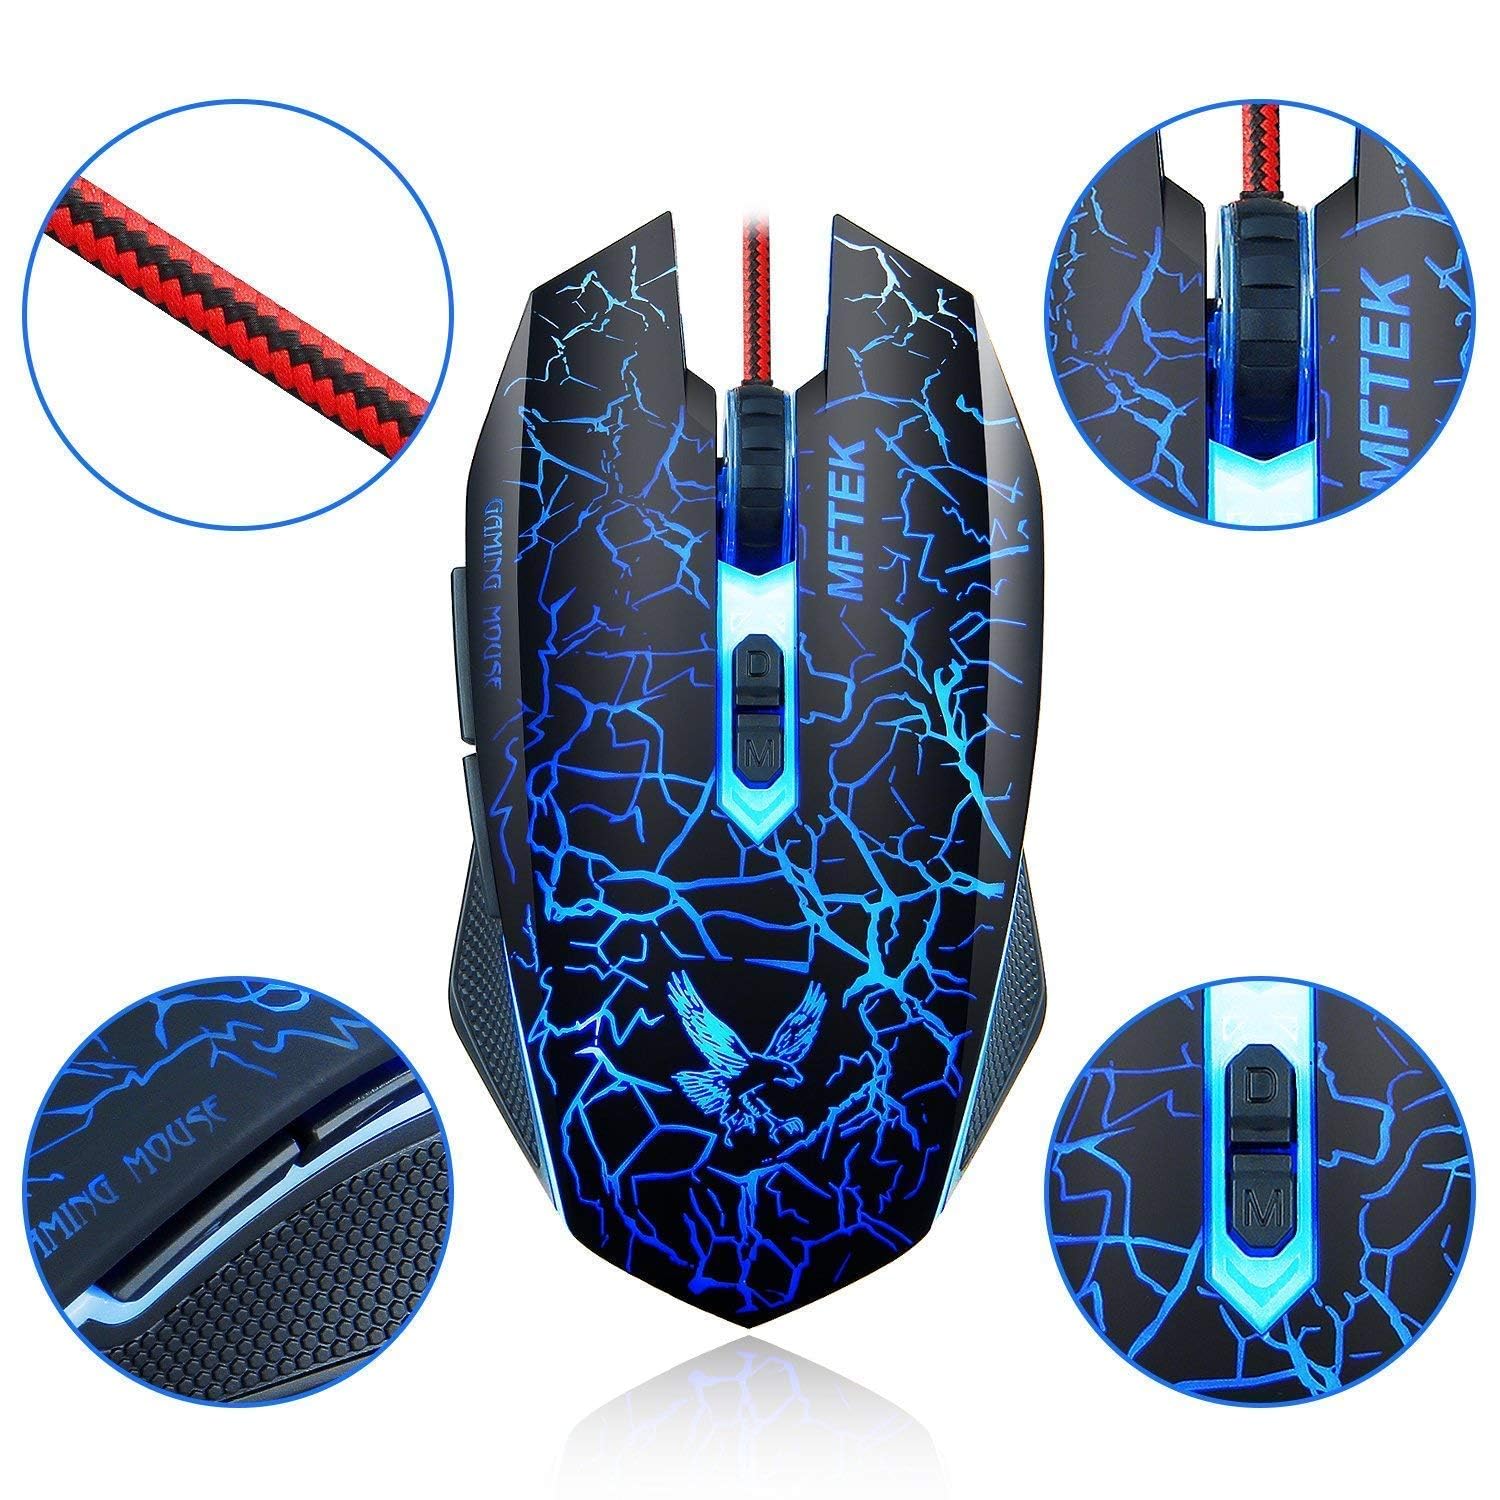 Bloodbat G94 One Hand RGB Gaming Keyboard and 7 Button Backlit Mouse ,USB Wired Rainbow Single Hand Keyboard with Wrist Rest Support Multimedia Keys4